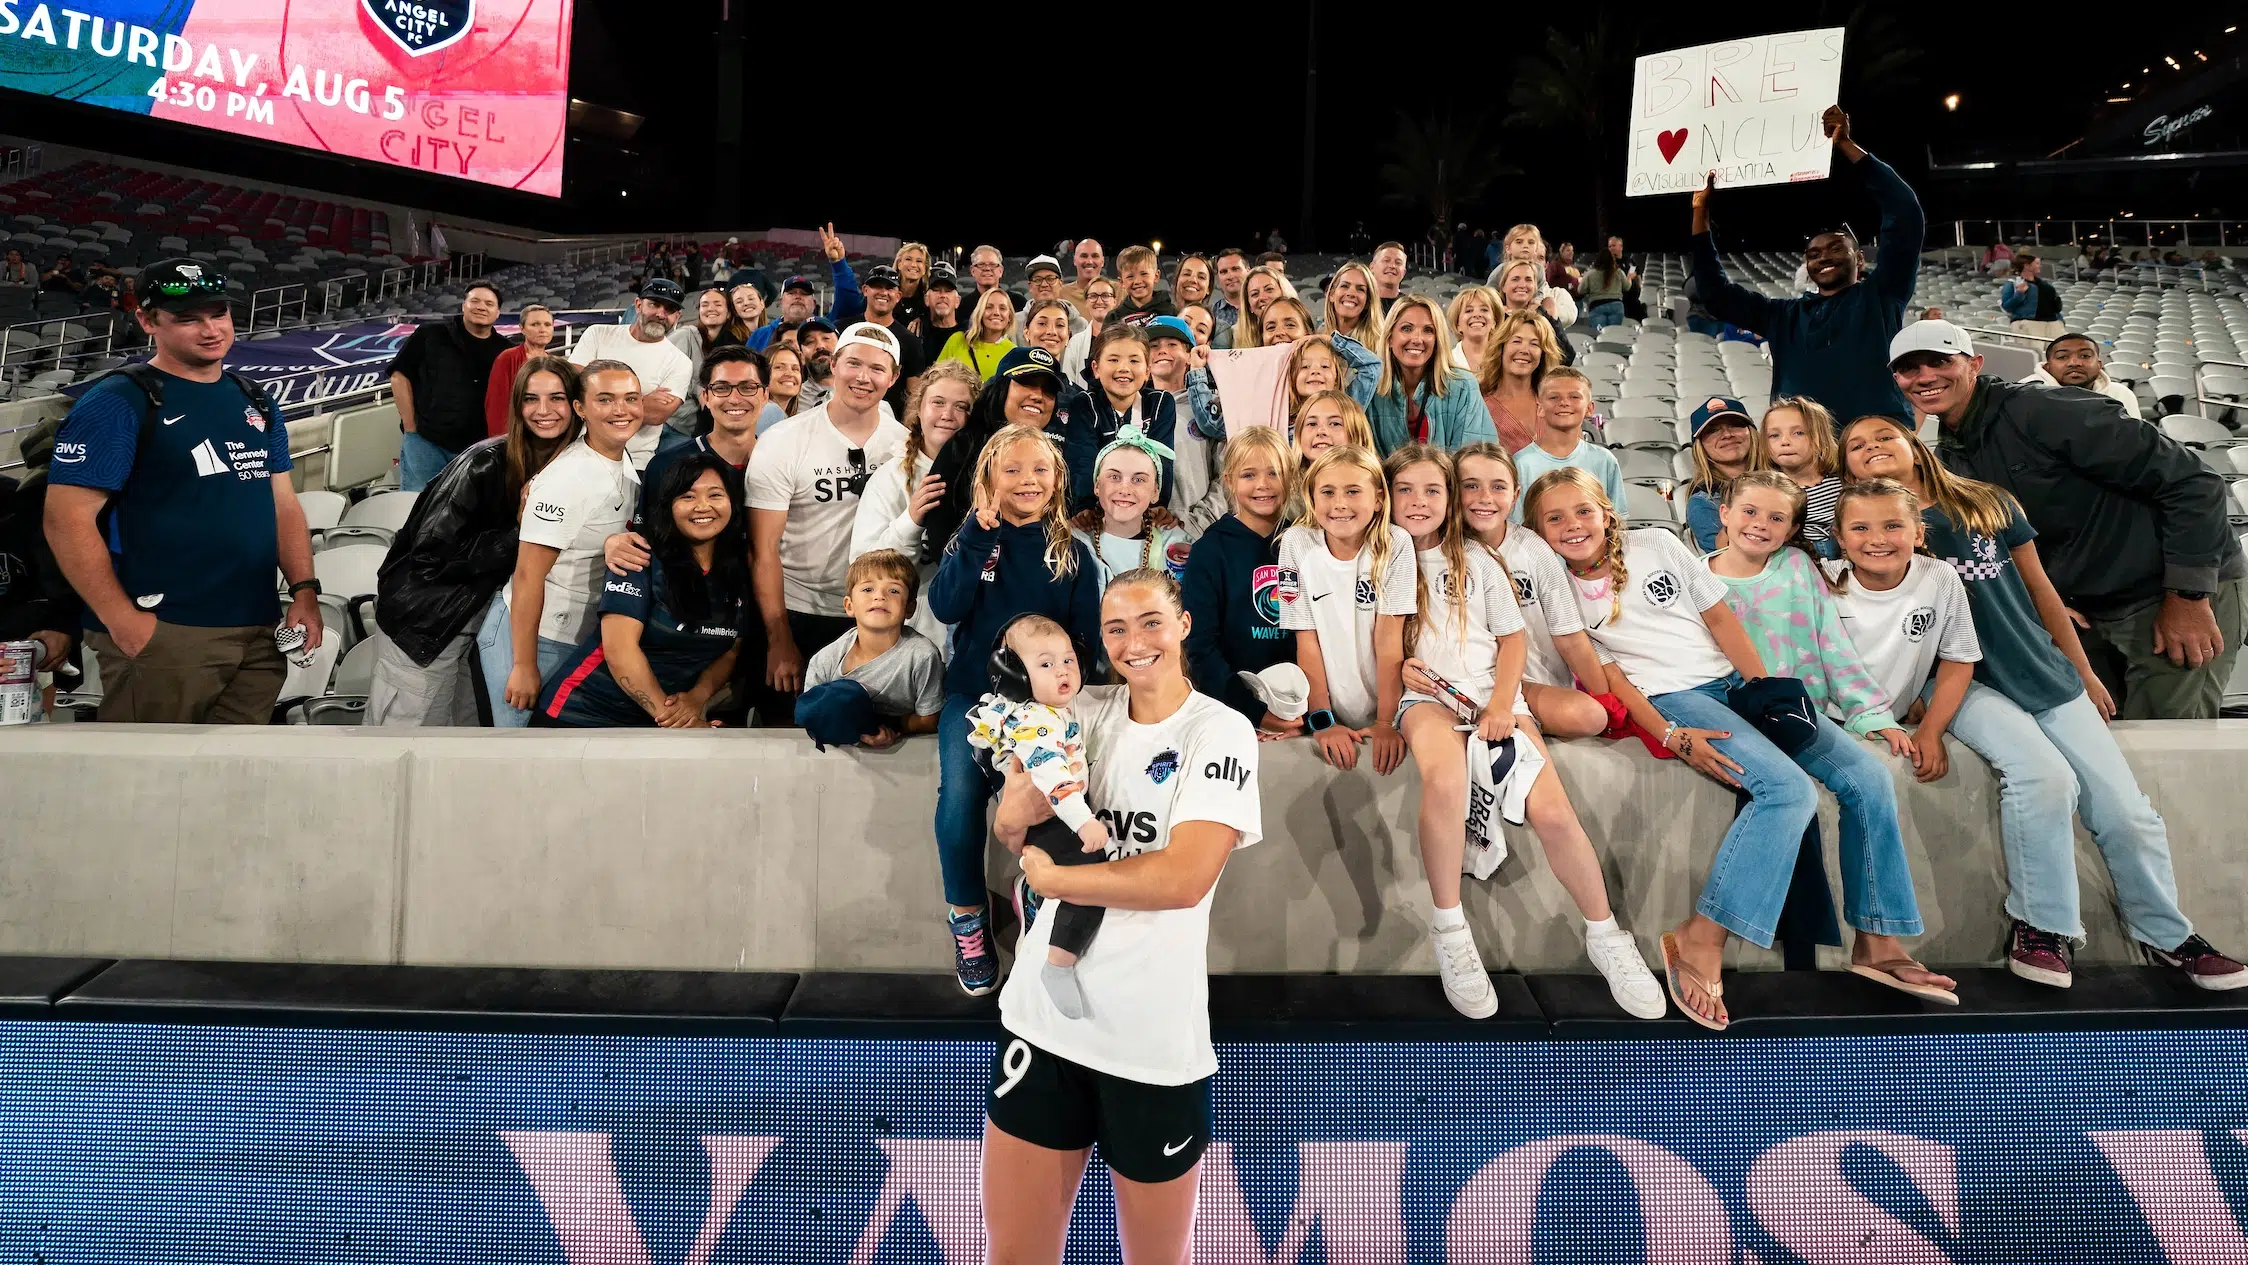 Tara McKeown in a white top and black shorts holds a baby wearing ear months in front of a group of fans filled into the stands at a soccer stadium.